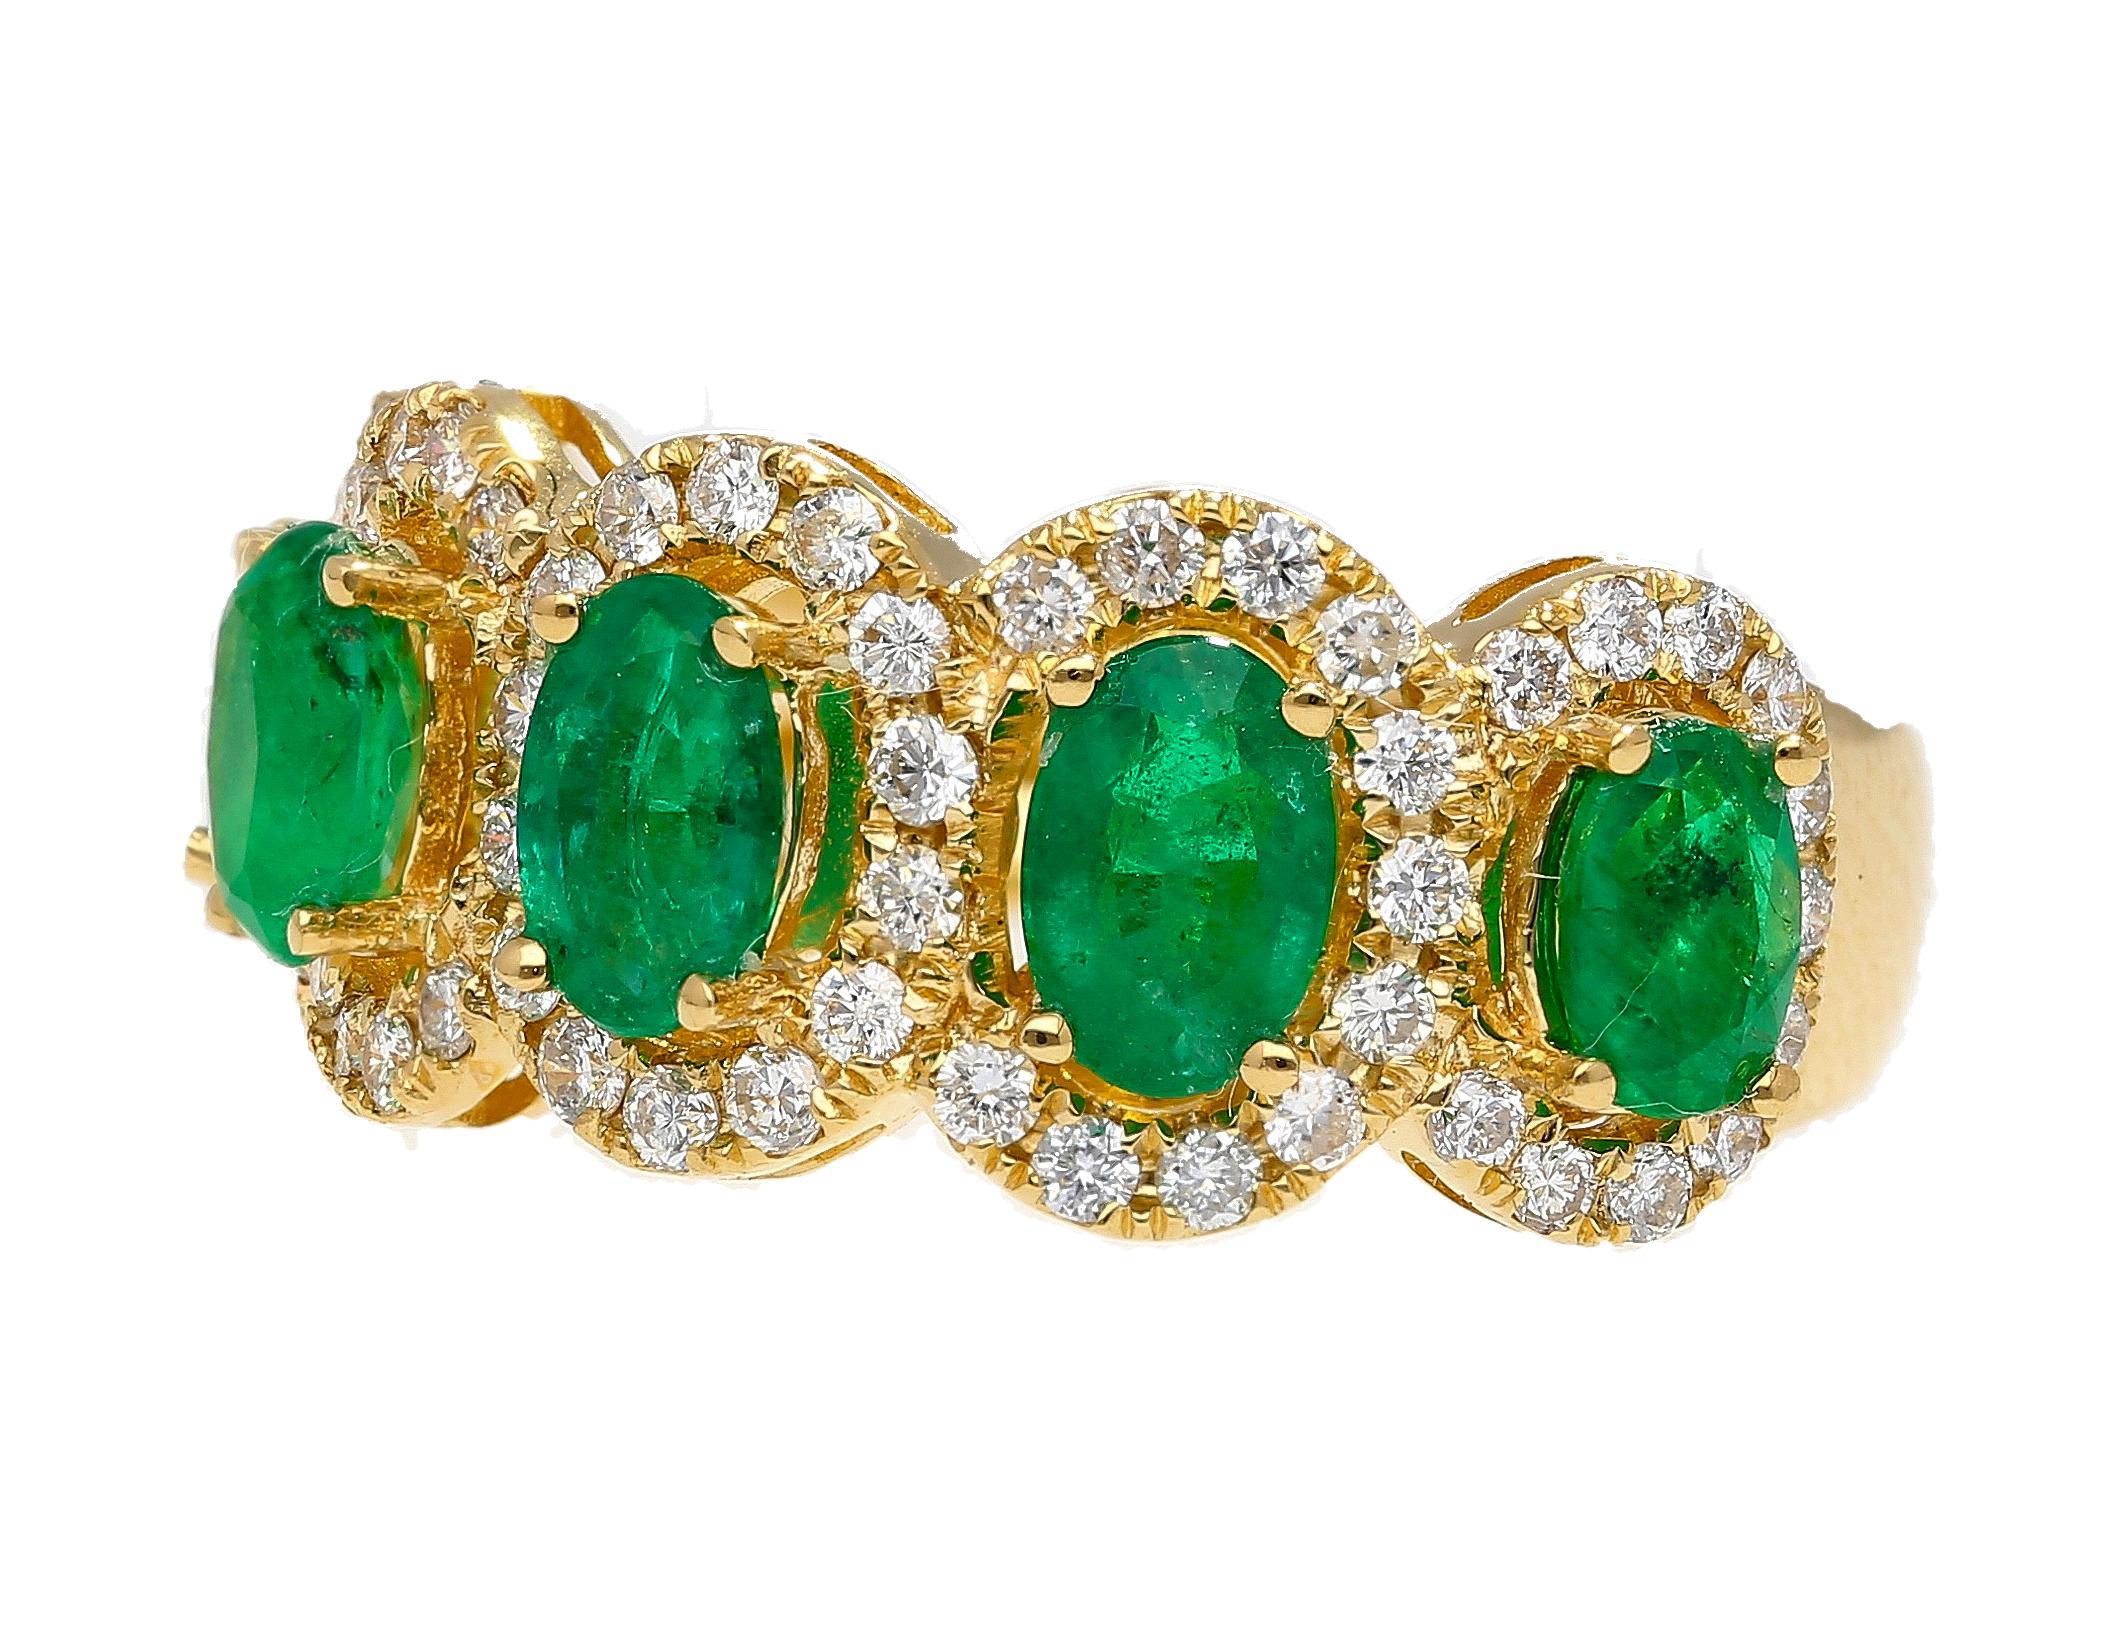 2.11 Carat Oval Cut Emerald and Diamond Wedding Band in 18K Gold For Sale 1